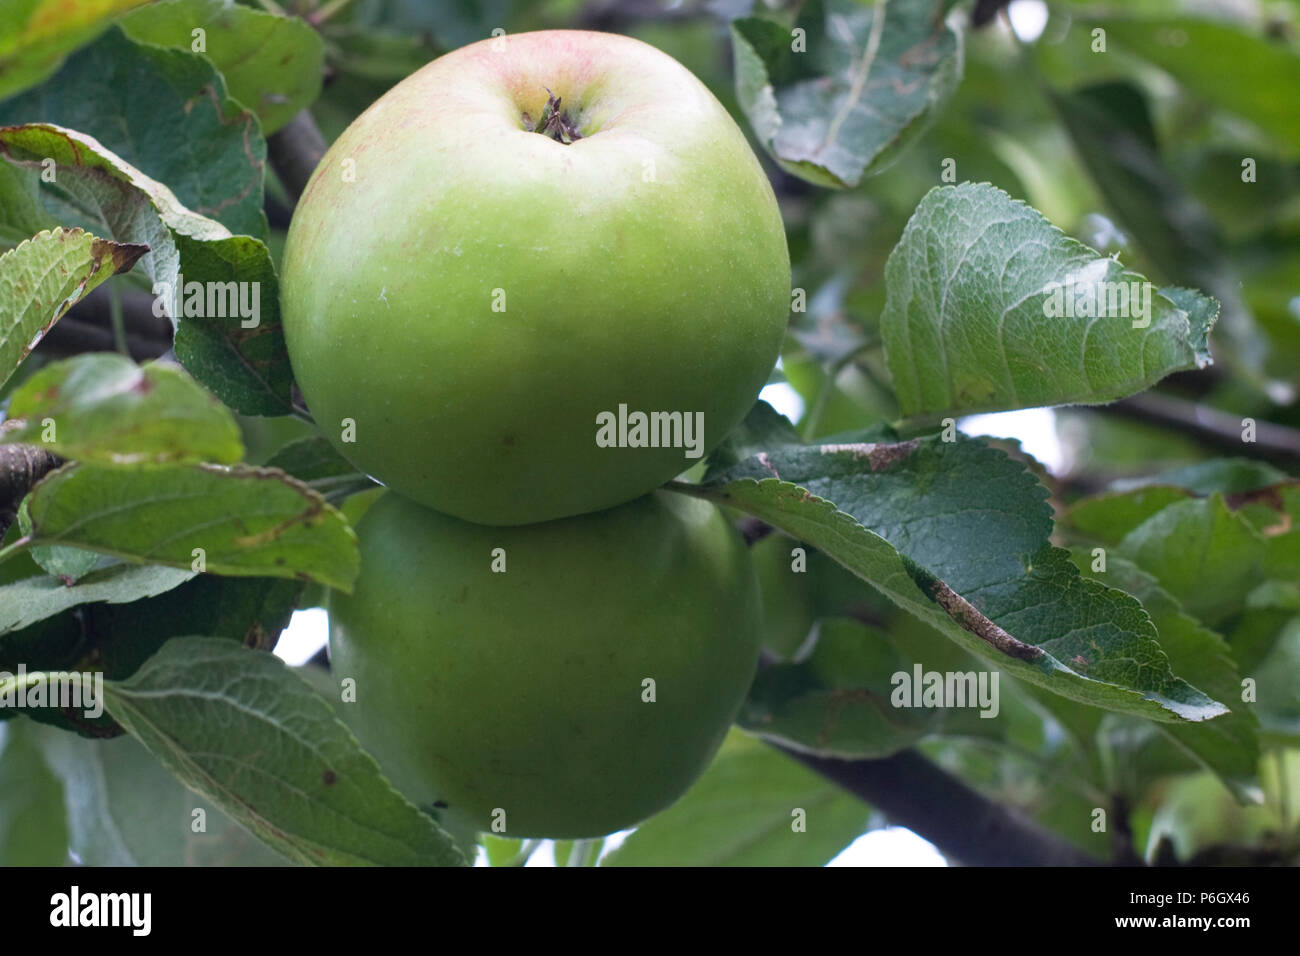 Sanspareil. Dessert and cooking apple. Ripe fruit on a tree in an organic orchard in Bristol. Stock Photo